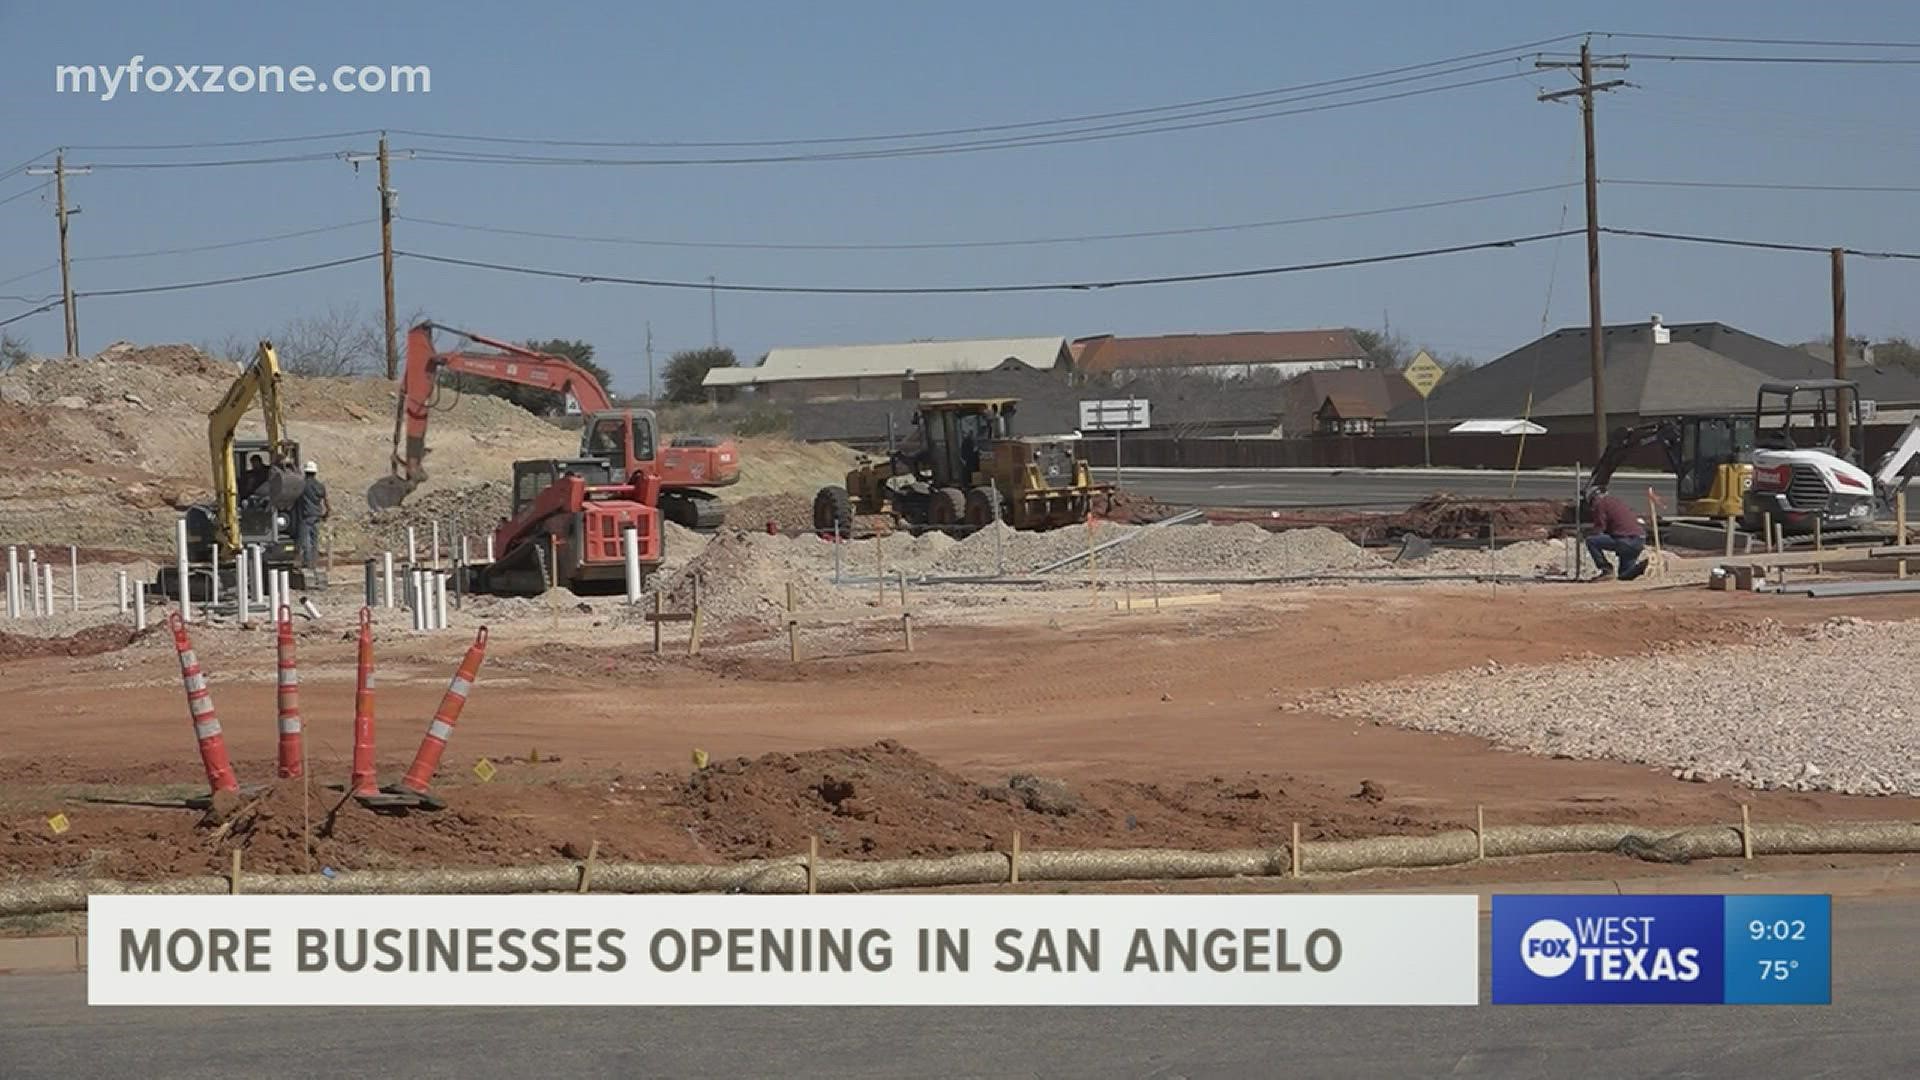 Some big-name business are making San Angelo their next destination for success.